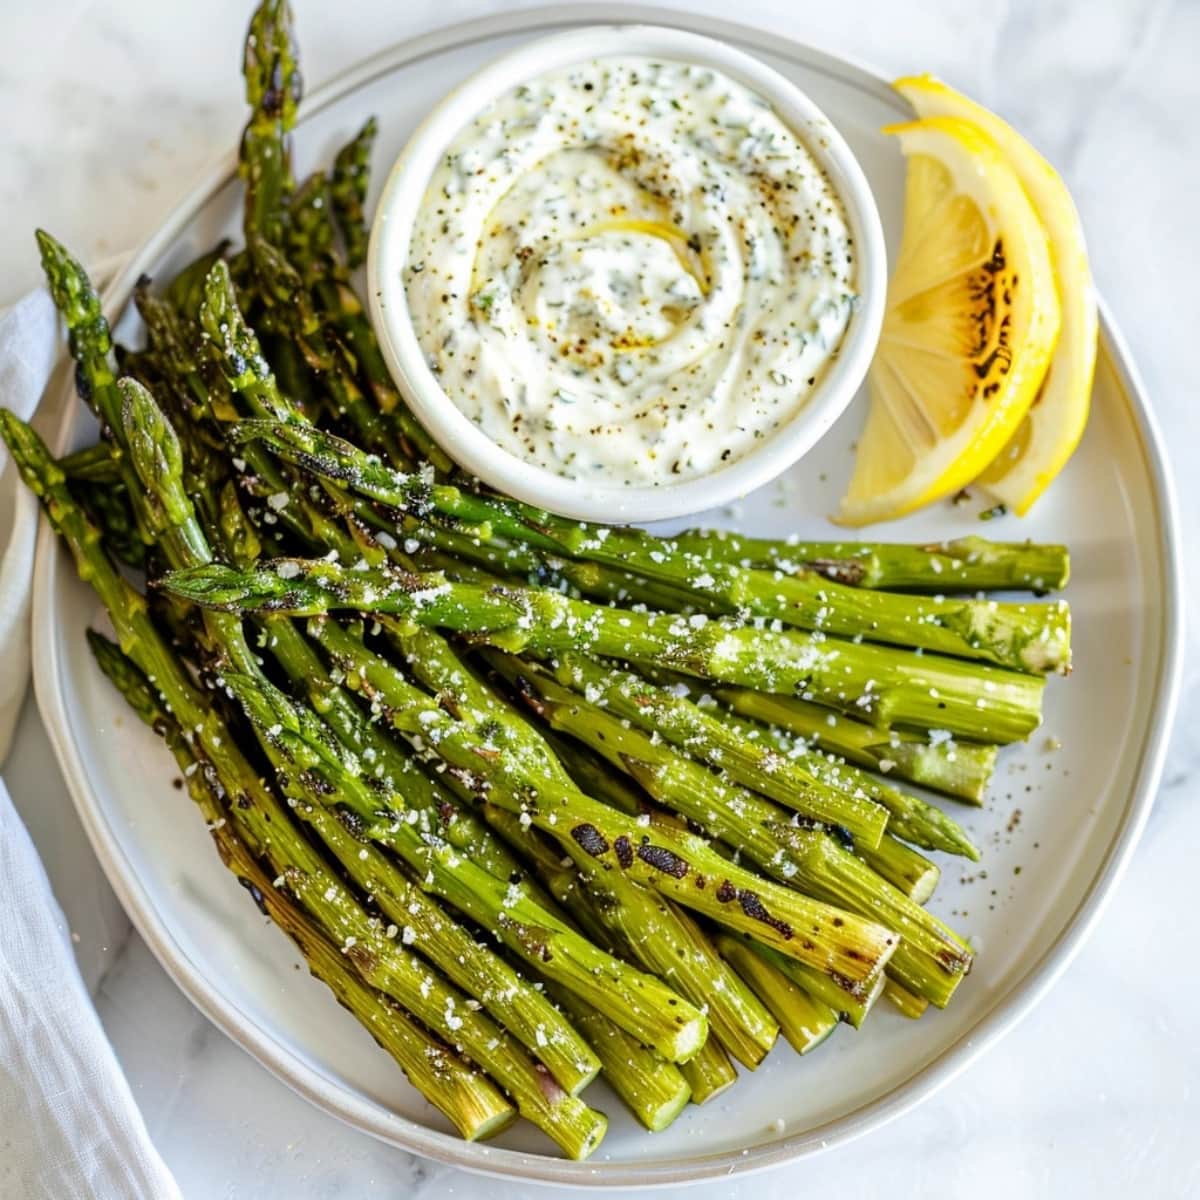 Seasoned air fried asparagus served with dip and lemon slices.